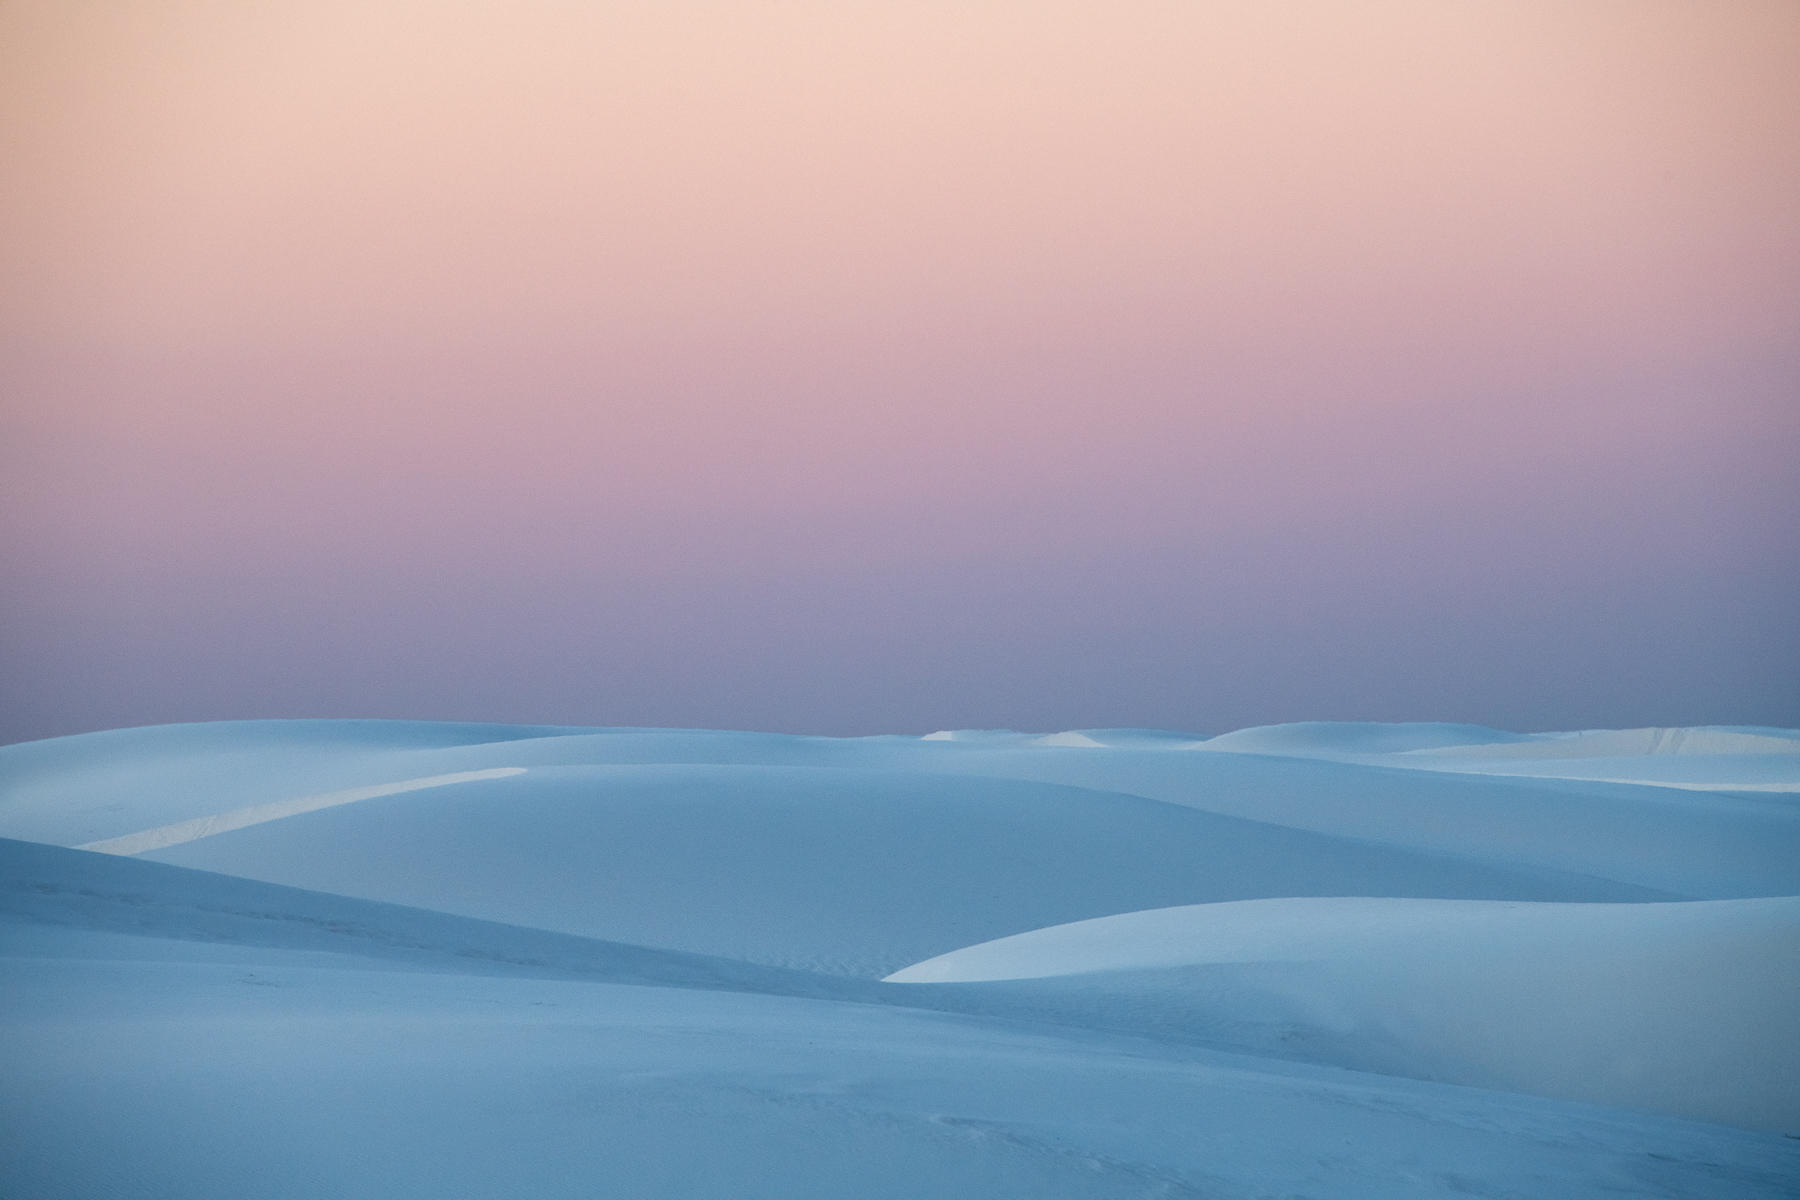 Subdued : White Sands, Glistening Sands of New Mexico : ELIZABETH SANJUAN PHOTOGRAPHY